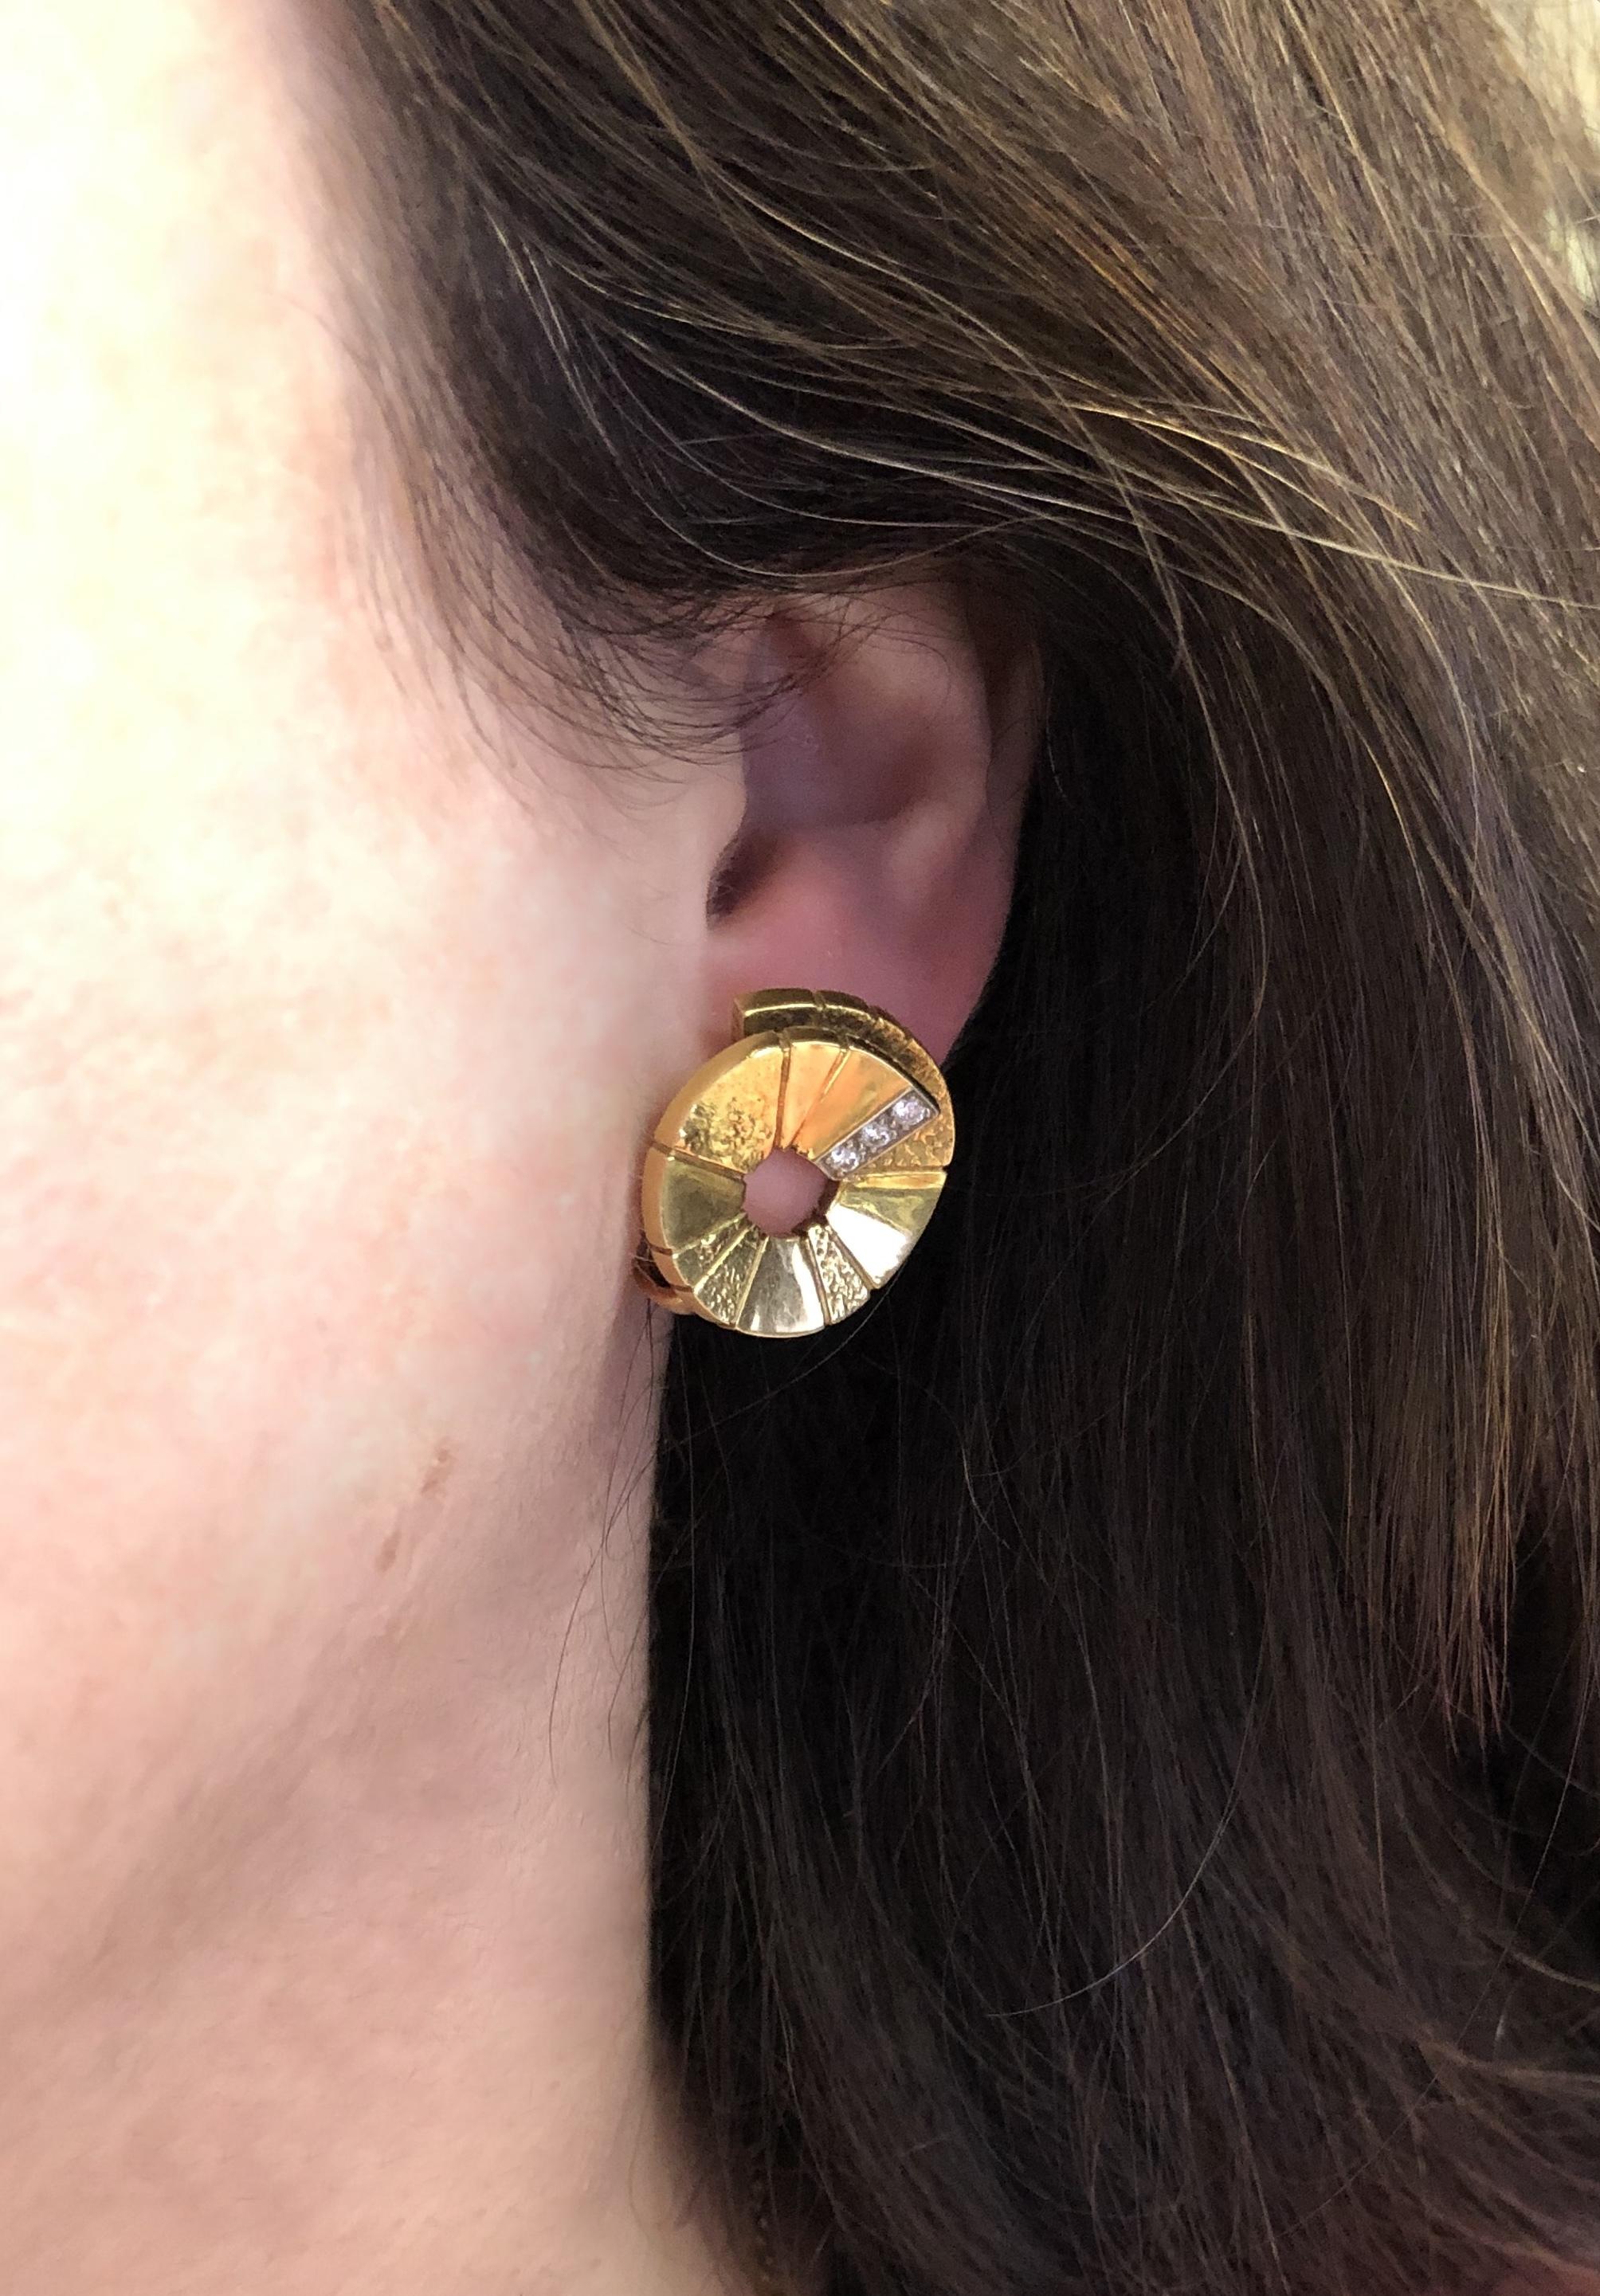 Textured 18 karat yellow gold spirals are accented with a total of approximately 0.25 carat of round diamonds. The earrings are of English origin and bear date marks for 1986.

Diameter: 7/8 inch. Clip backs with posts.